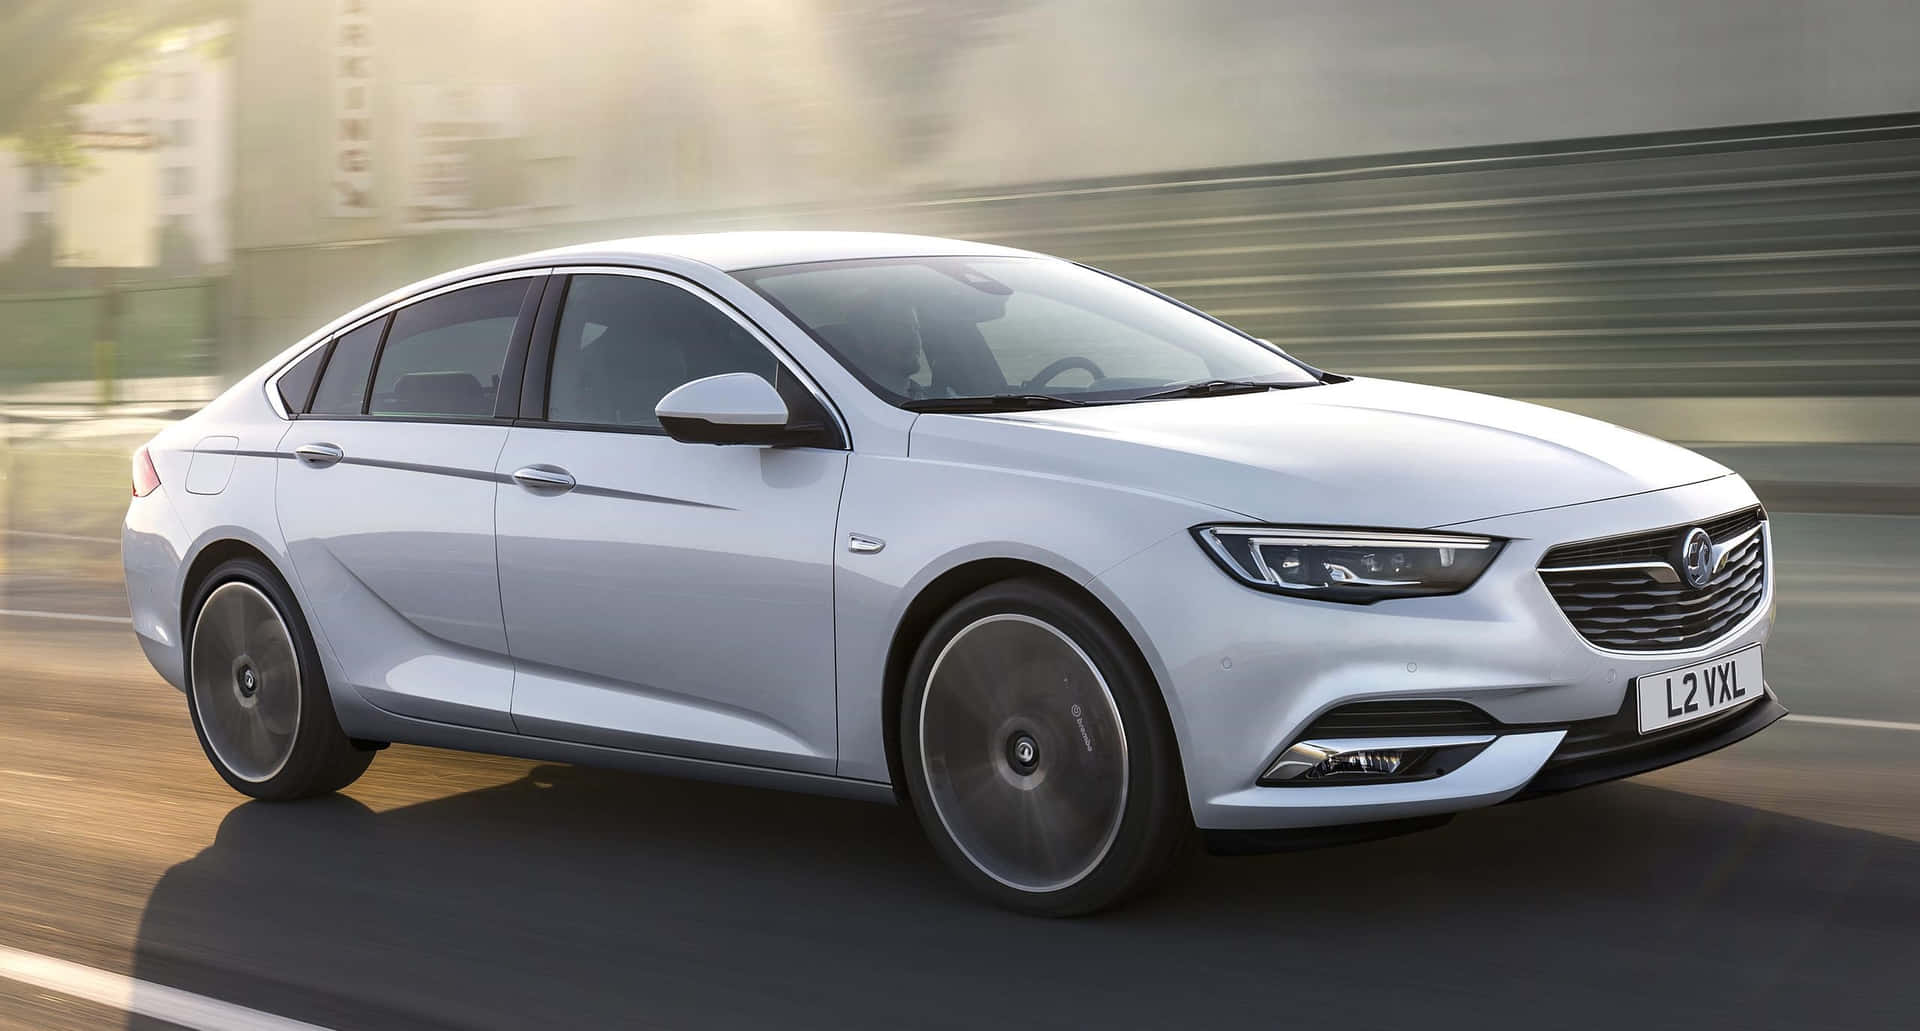 Sleek and Stylish Opel Insignia in Motion Wallpaper